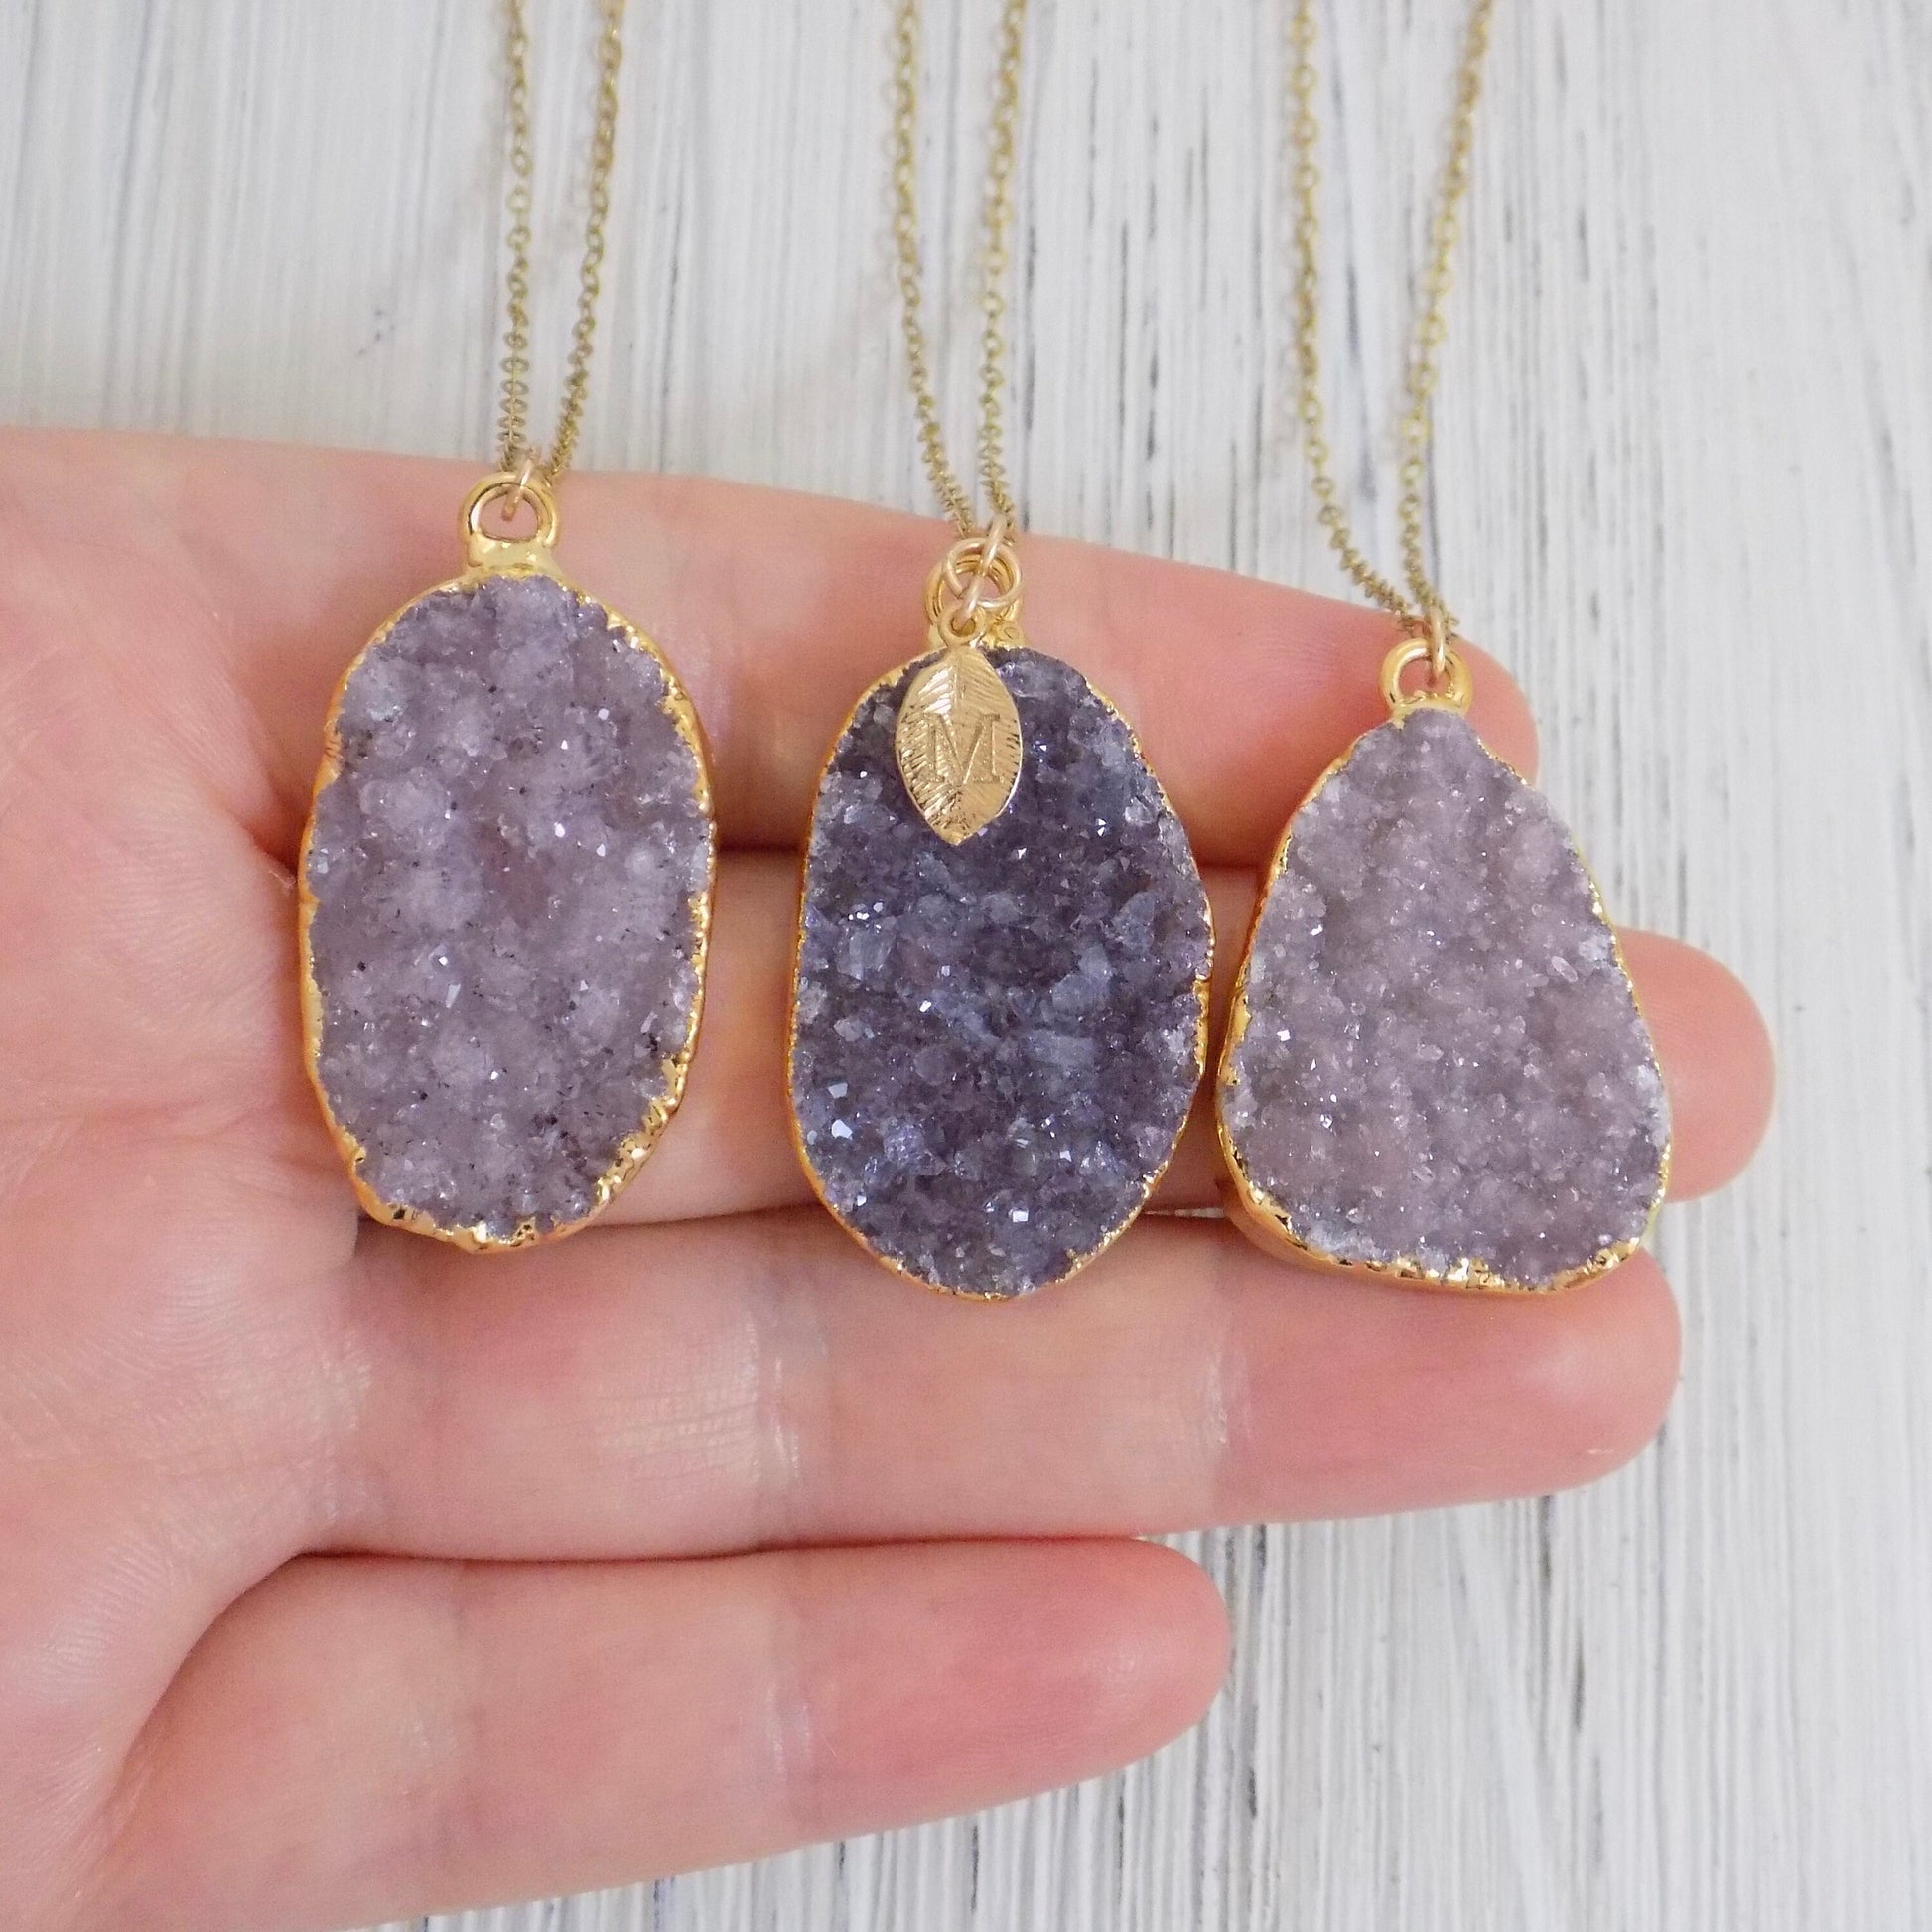 Personalized Raw Amethyst Necklace - Druzy Pendant Necklace